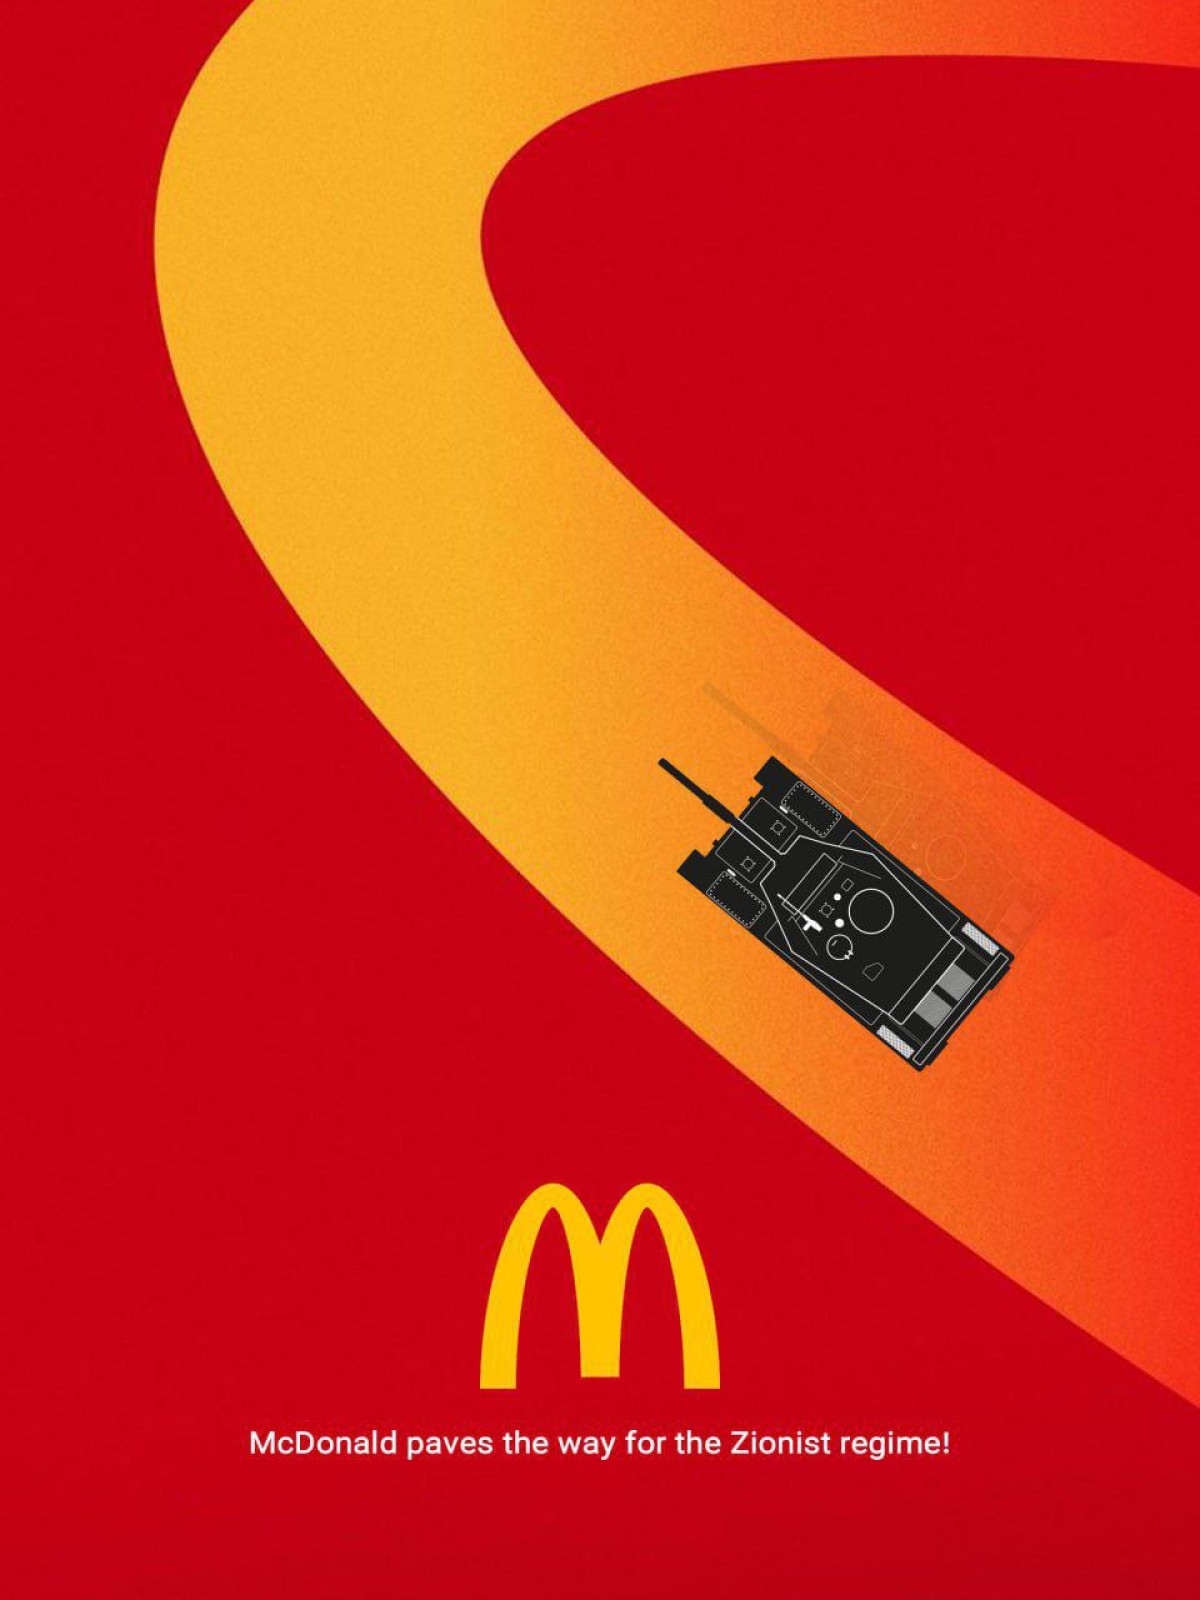 McDonald paves the way for the Zionist regime!